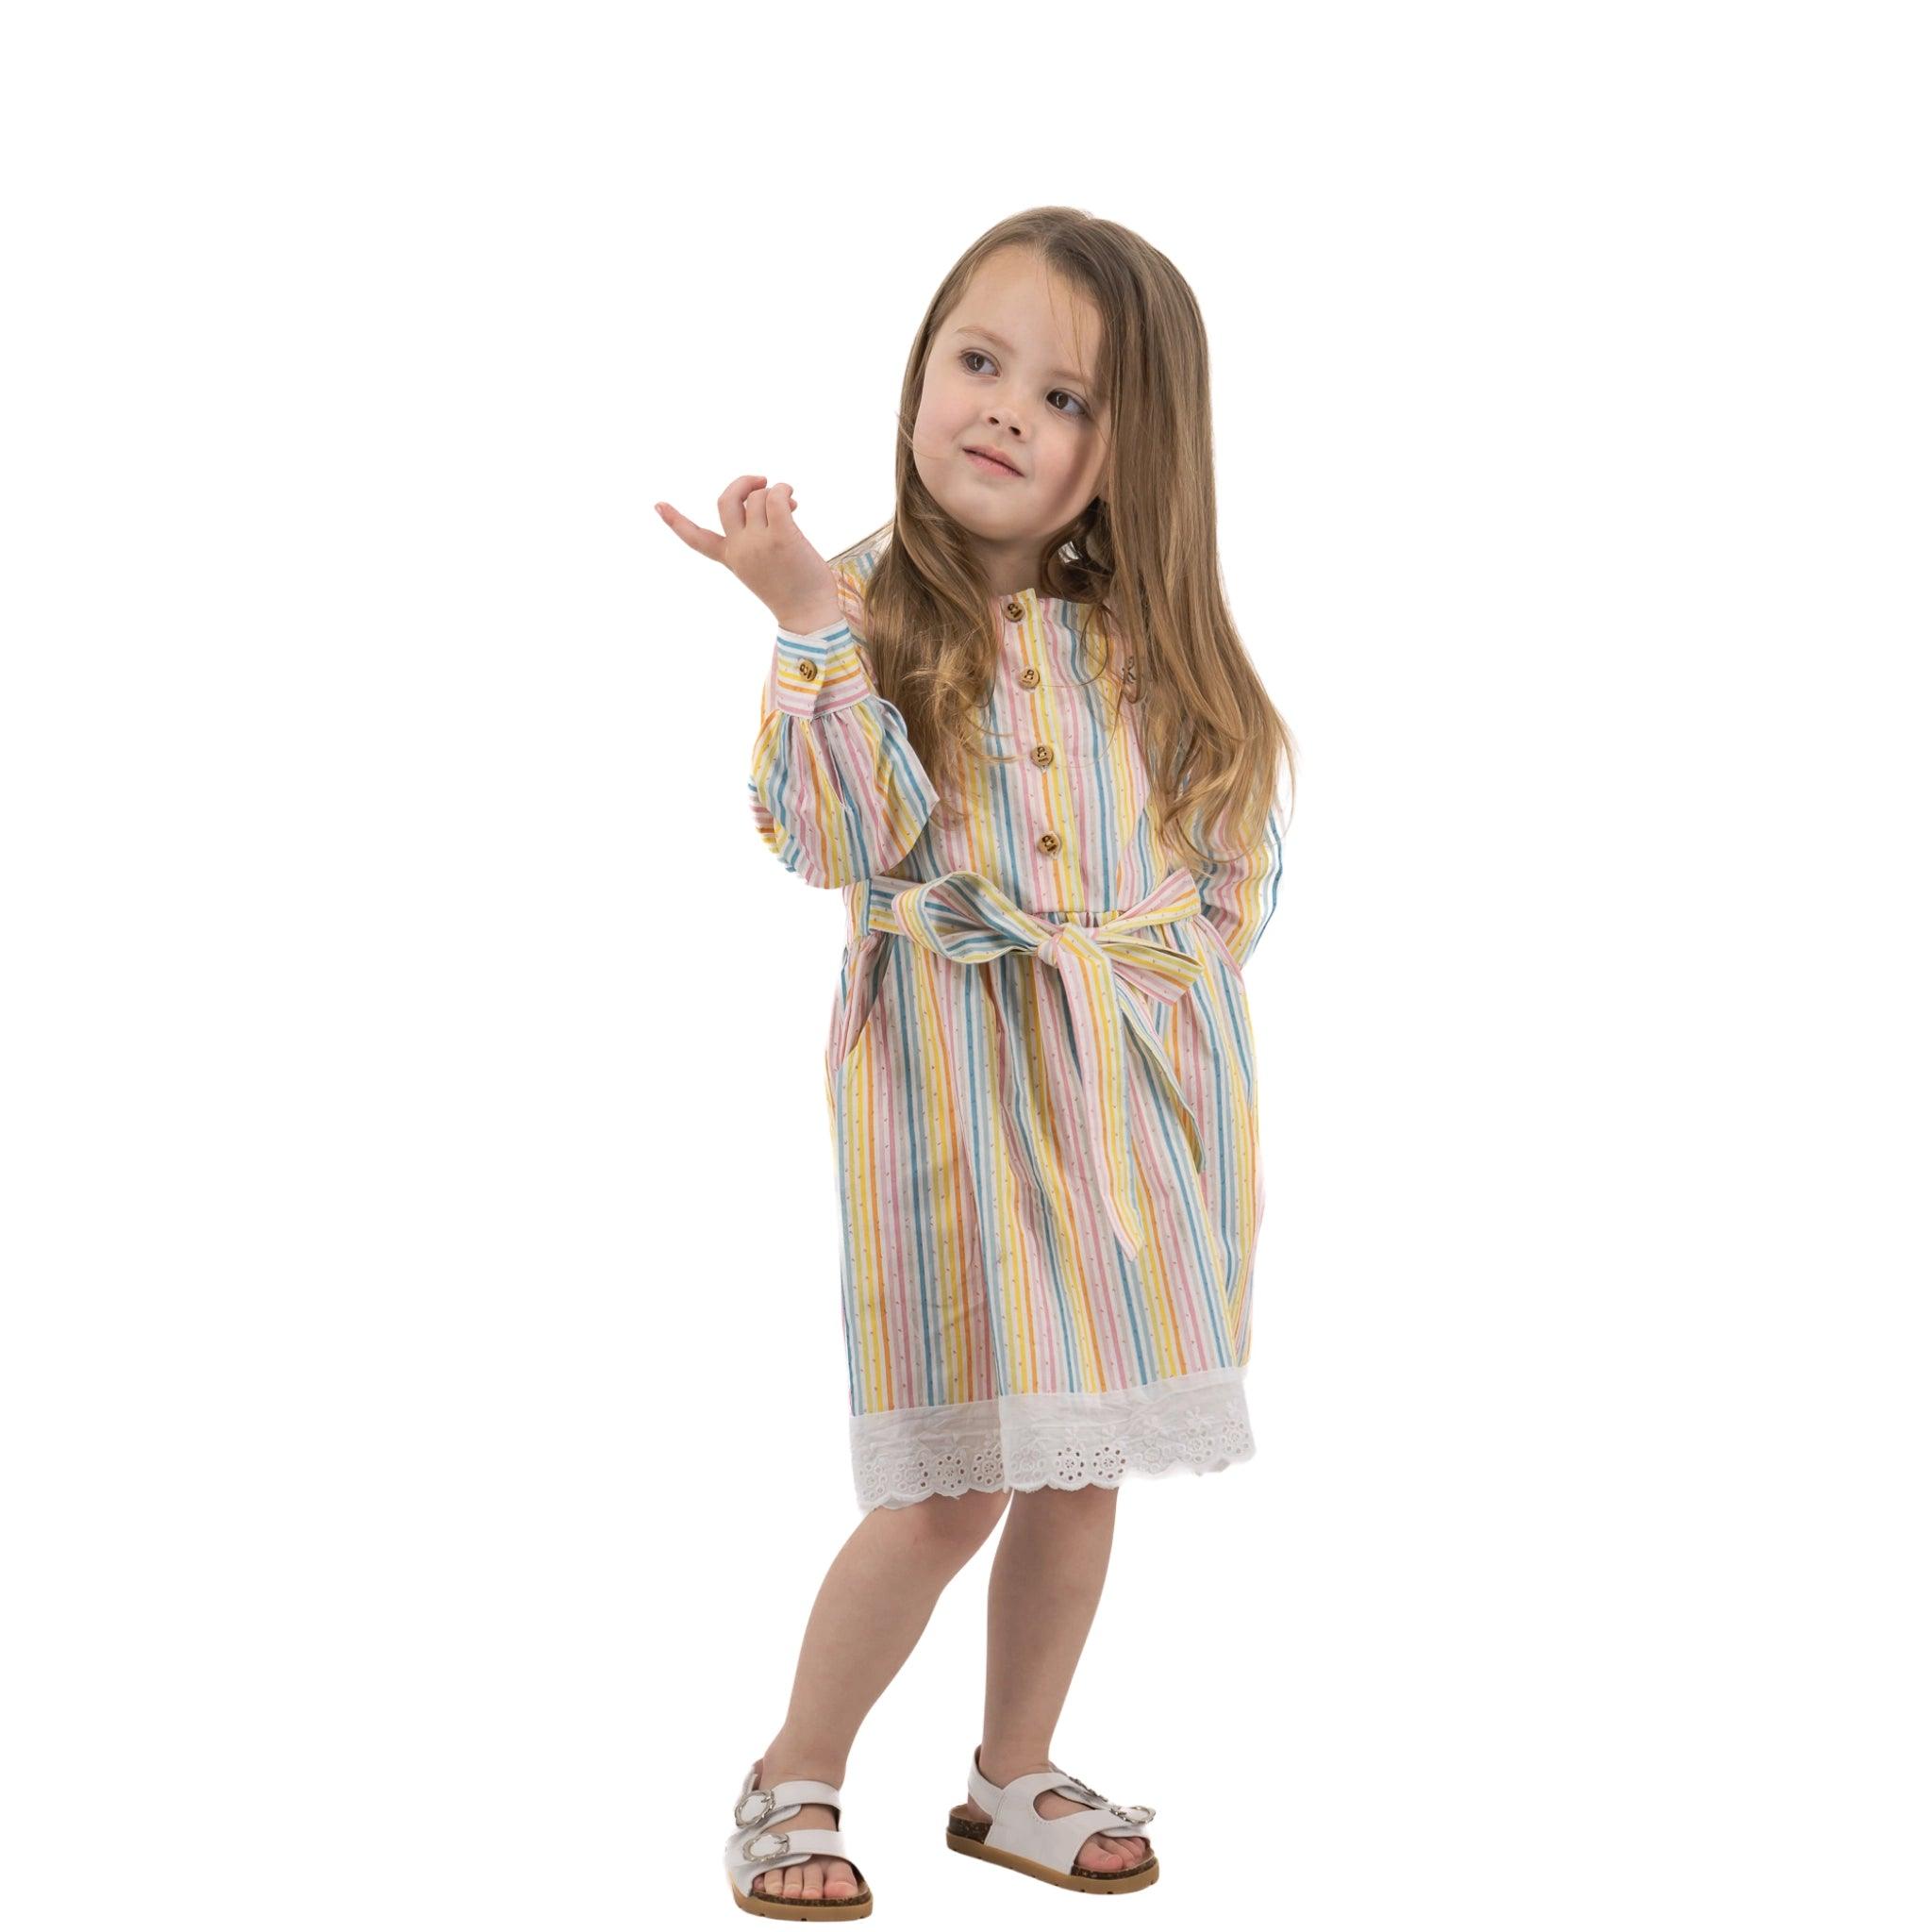 A young girl wearing a Karee Long Puff Sleeve White Cotton Dress with Stripes and sandals gestures with one hand, standing against a white background.